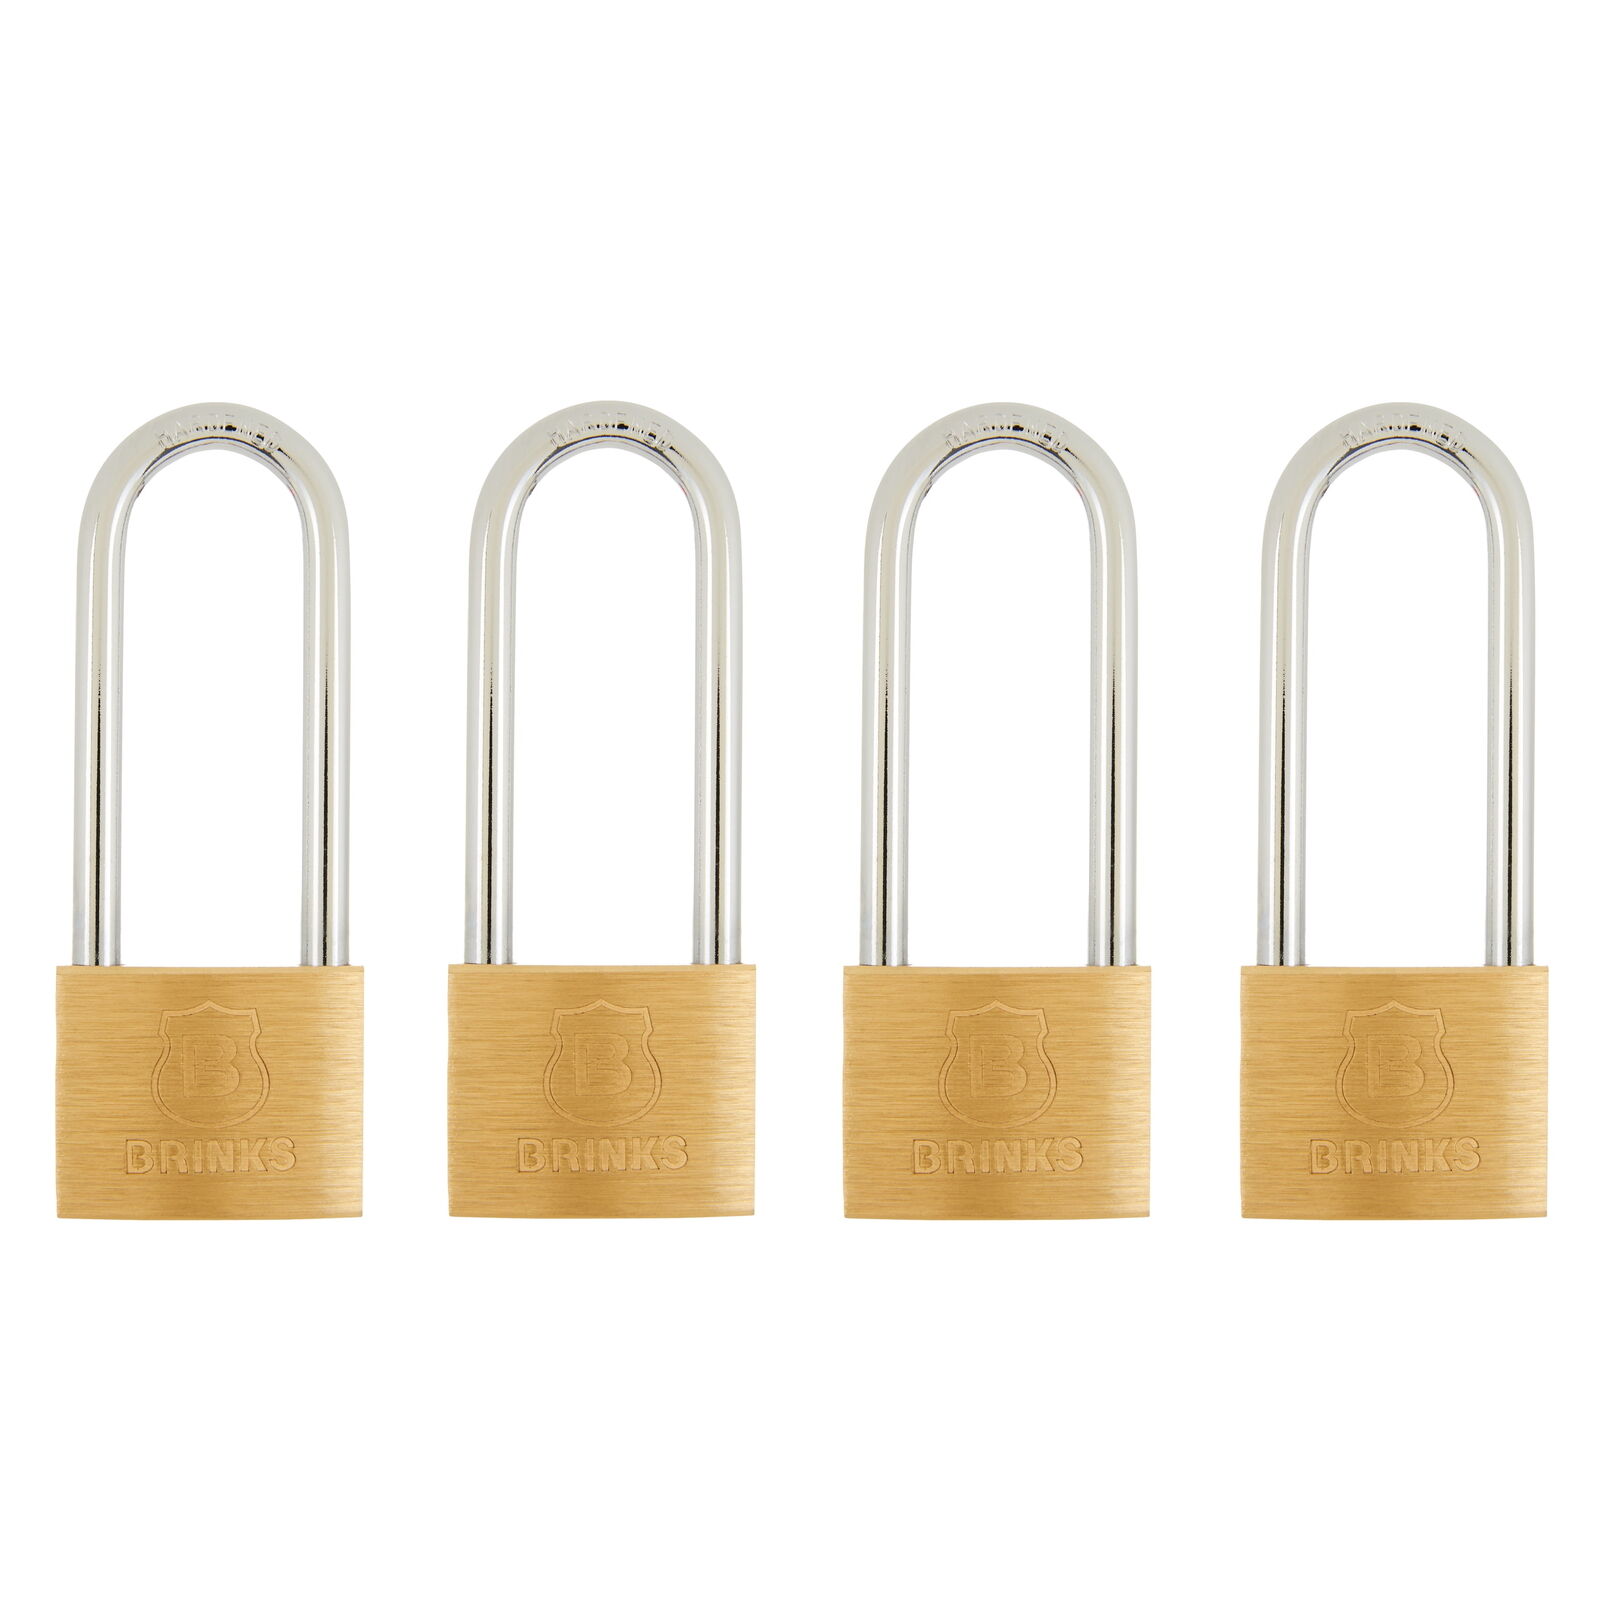 Brinks Solid Brass 40mm Keyed Padlock with 2 1/2in Shackle, 4 Pack